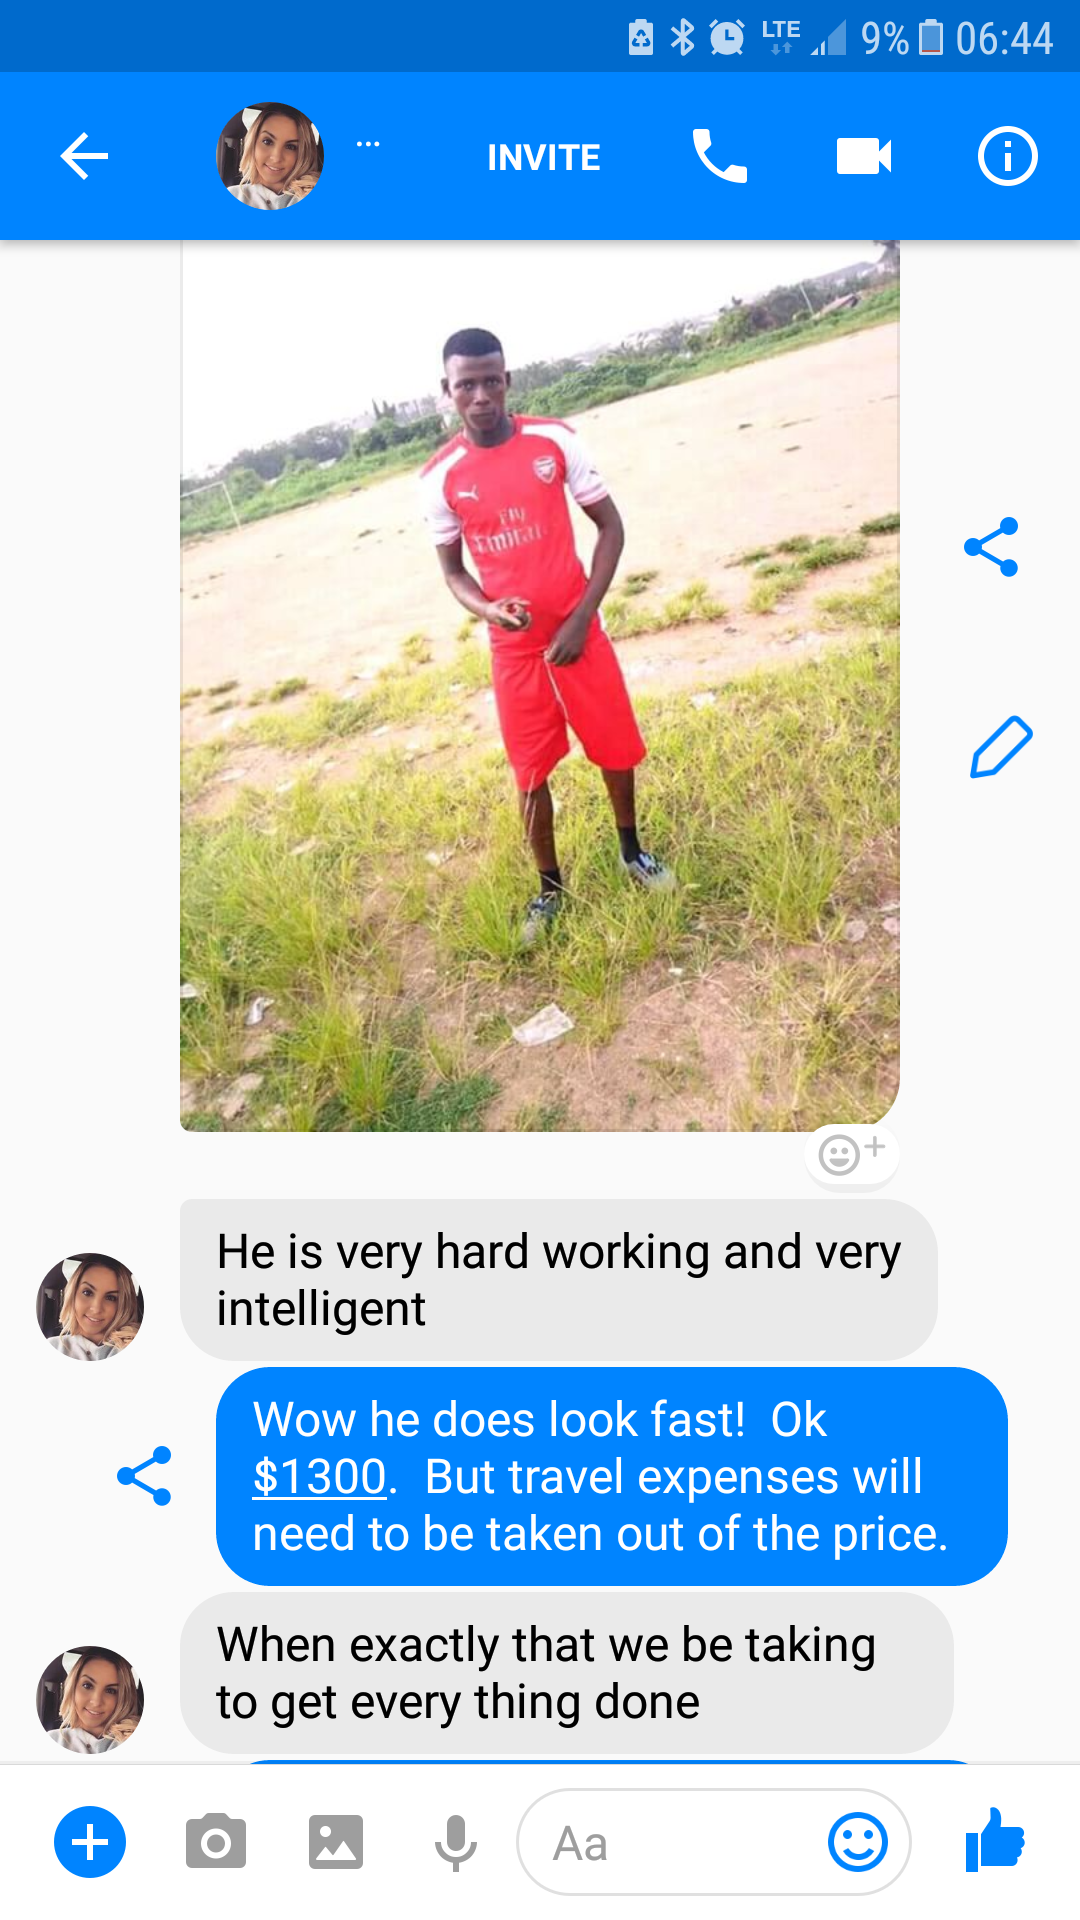 water - @ 9 % Invite O He is very hard working and very intelligent Wow he does look fast! Ok $1300. But travel expenses will need to be taken out of the price, When exactly that we be taking to get every thing done